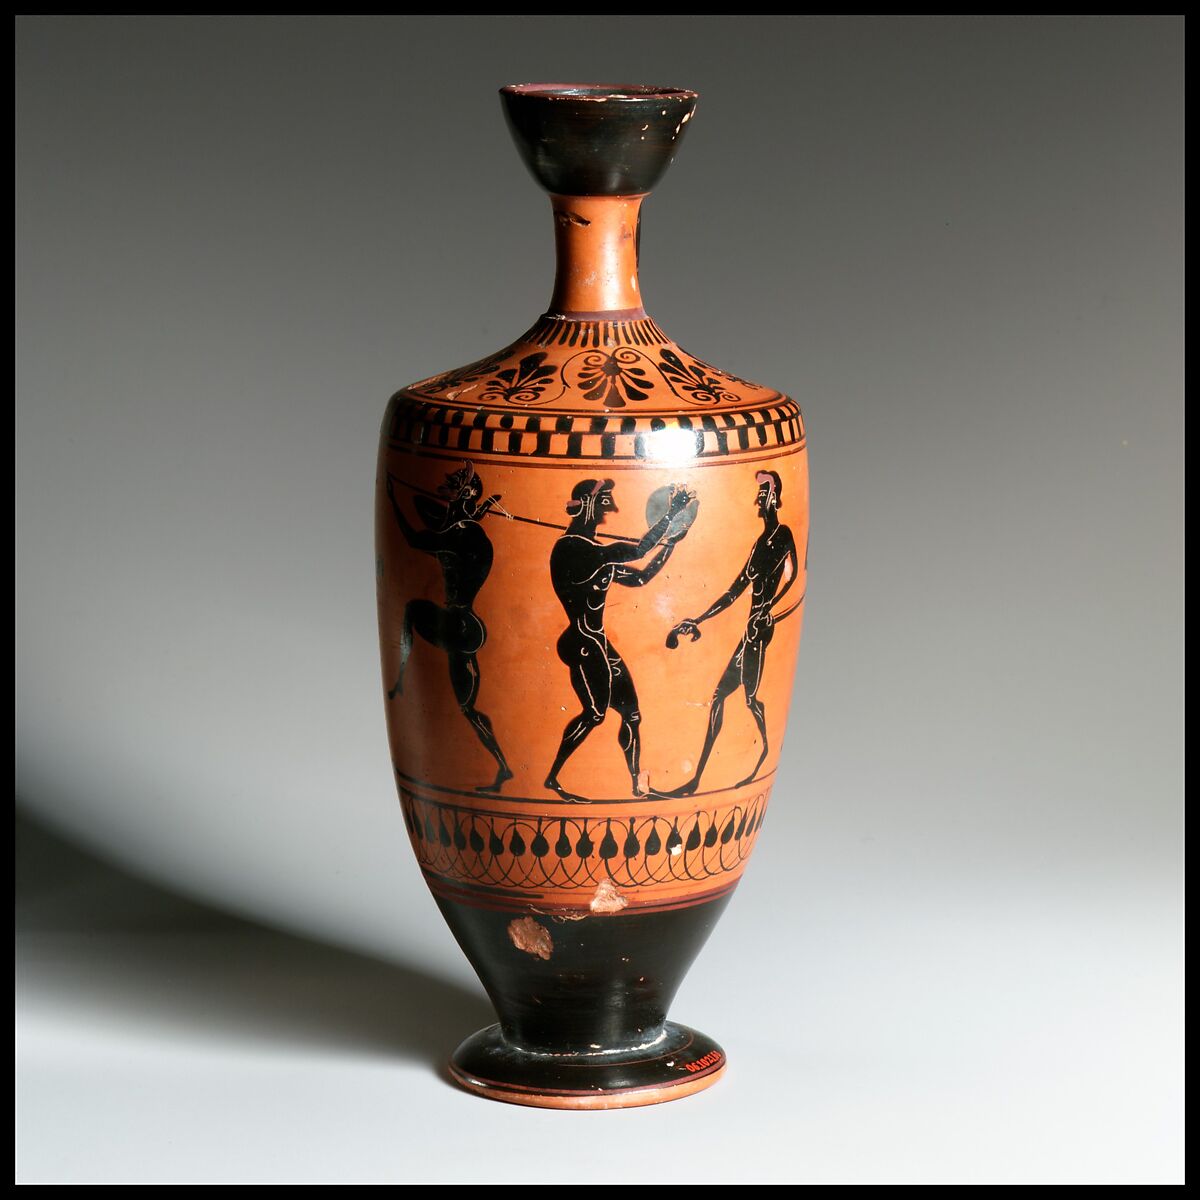 Terracotta lekythos (oil flask), Attributed to a painter associated with the Michigan Class, Terracotta, Greek, Attic 